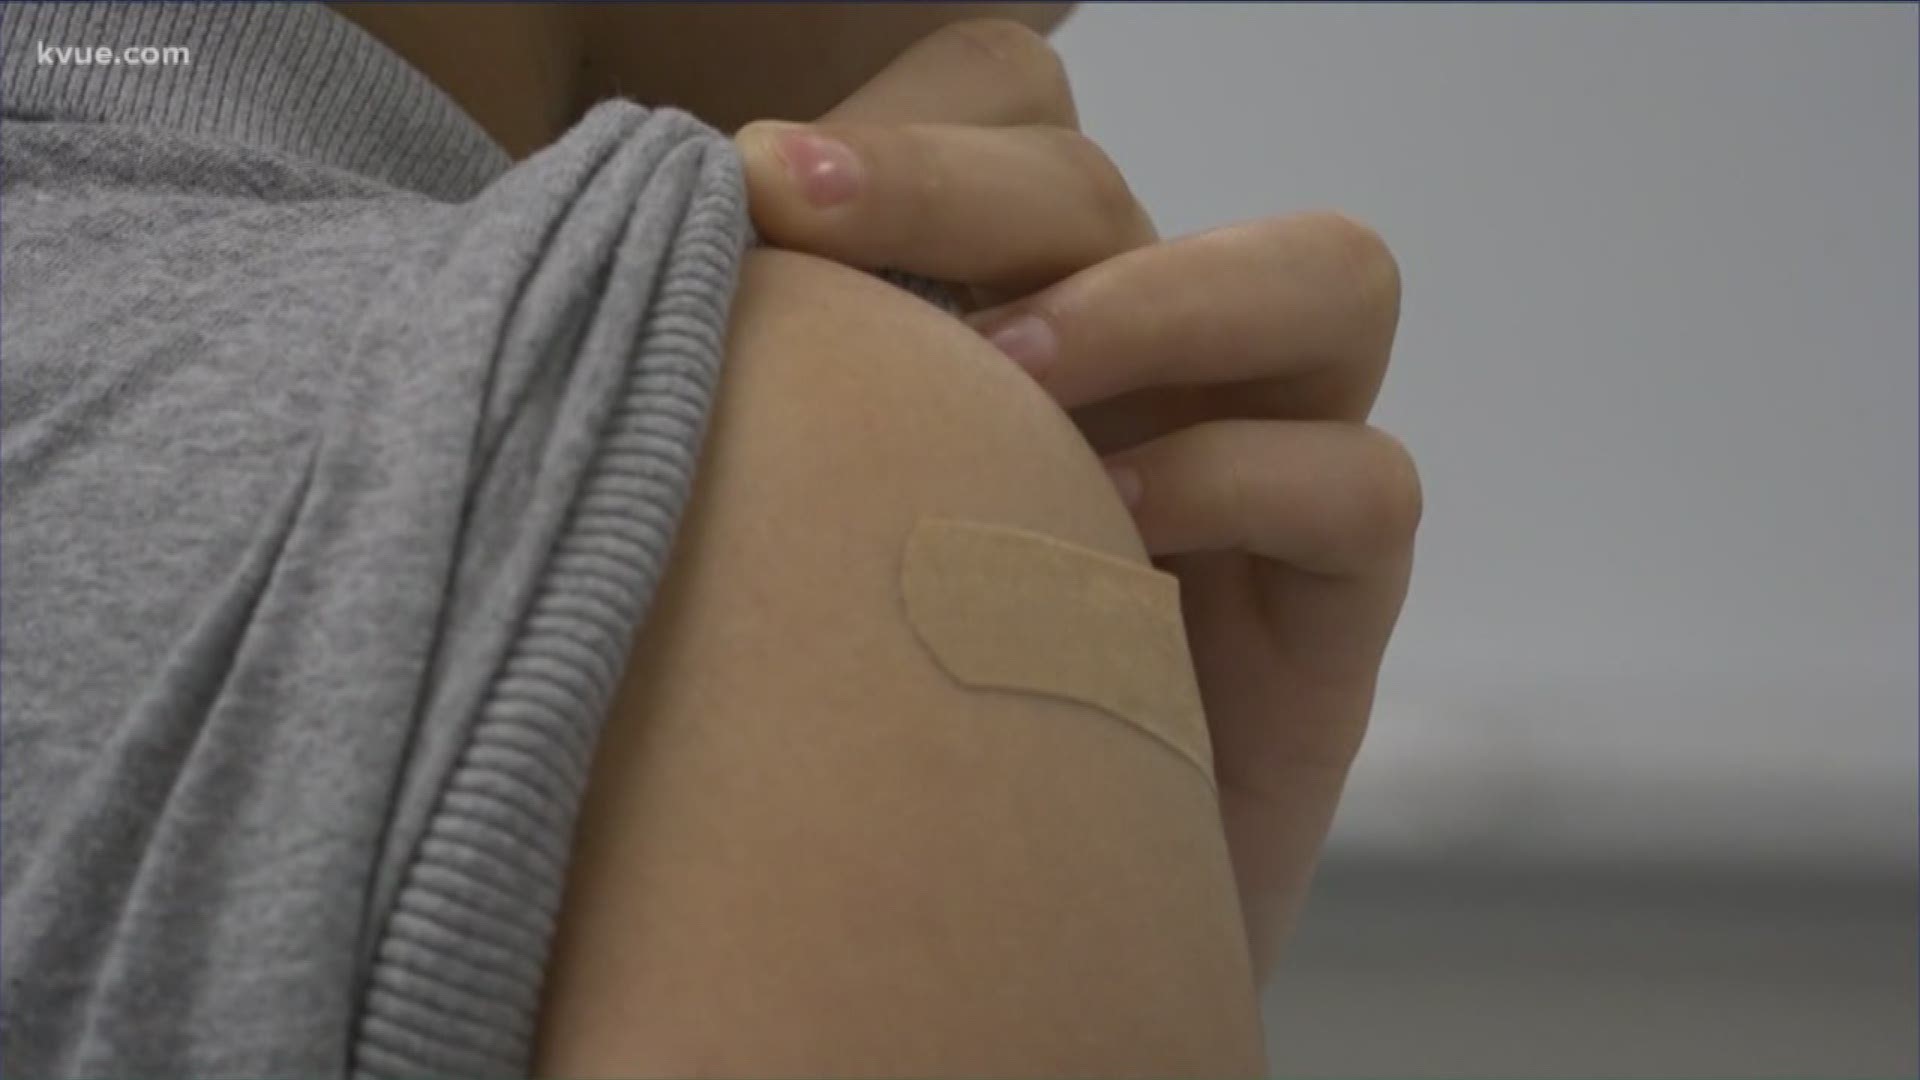 The University of Texas will require all incoming students to show proof of measles immunity starting this fall.